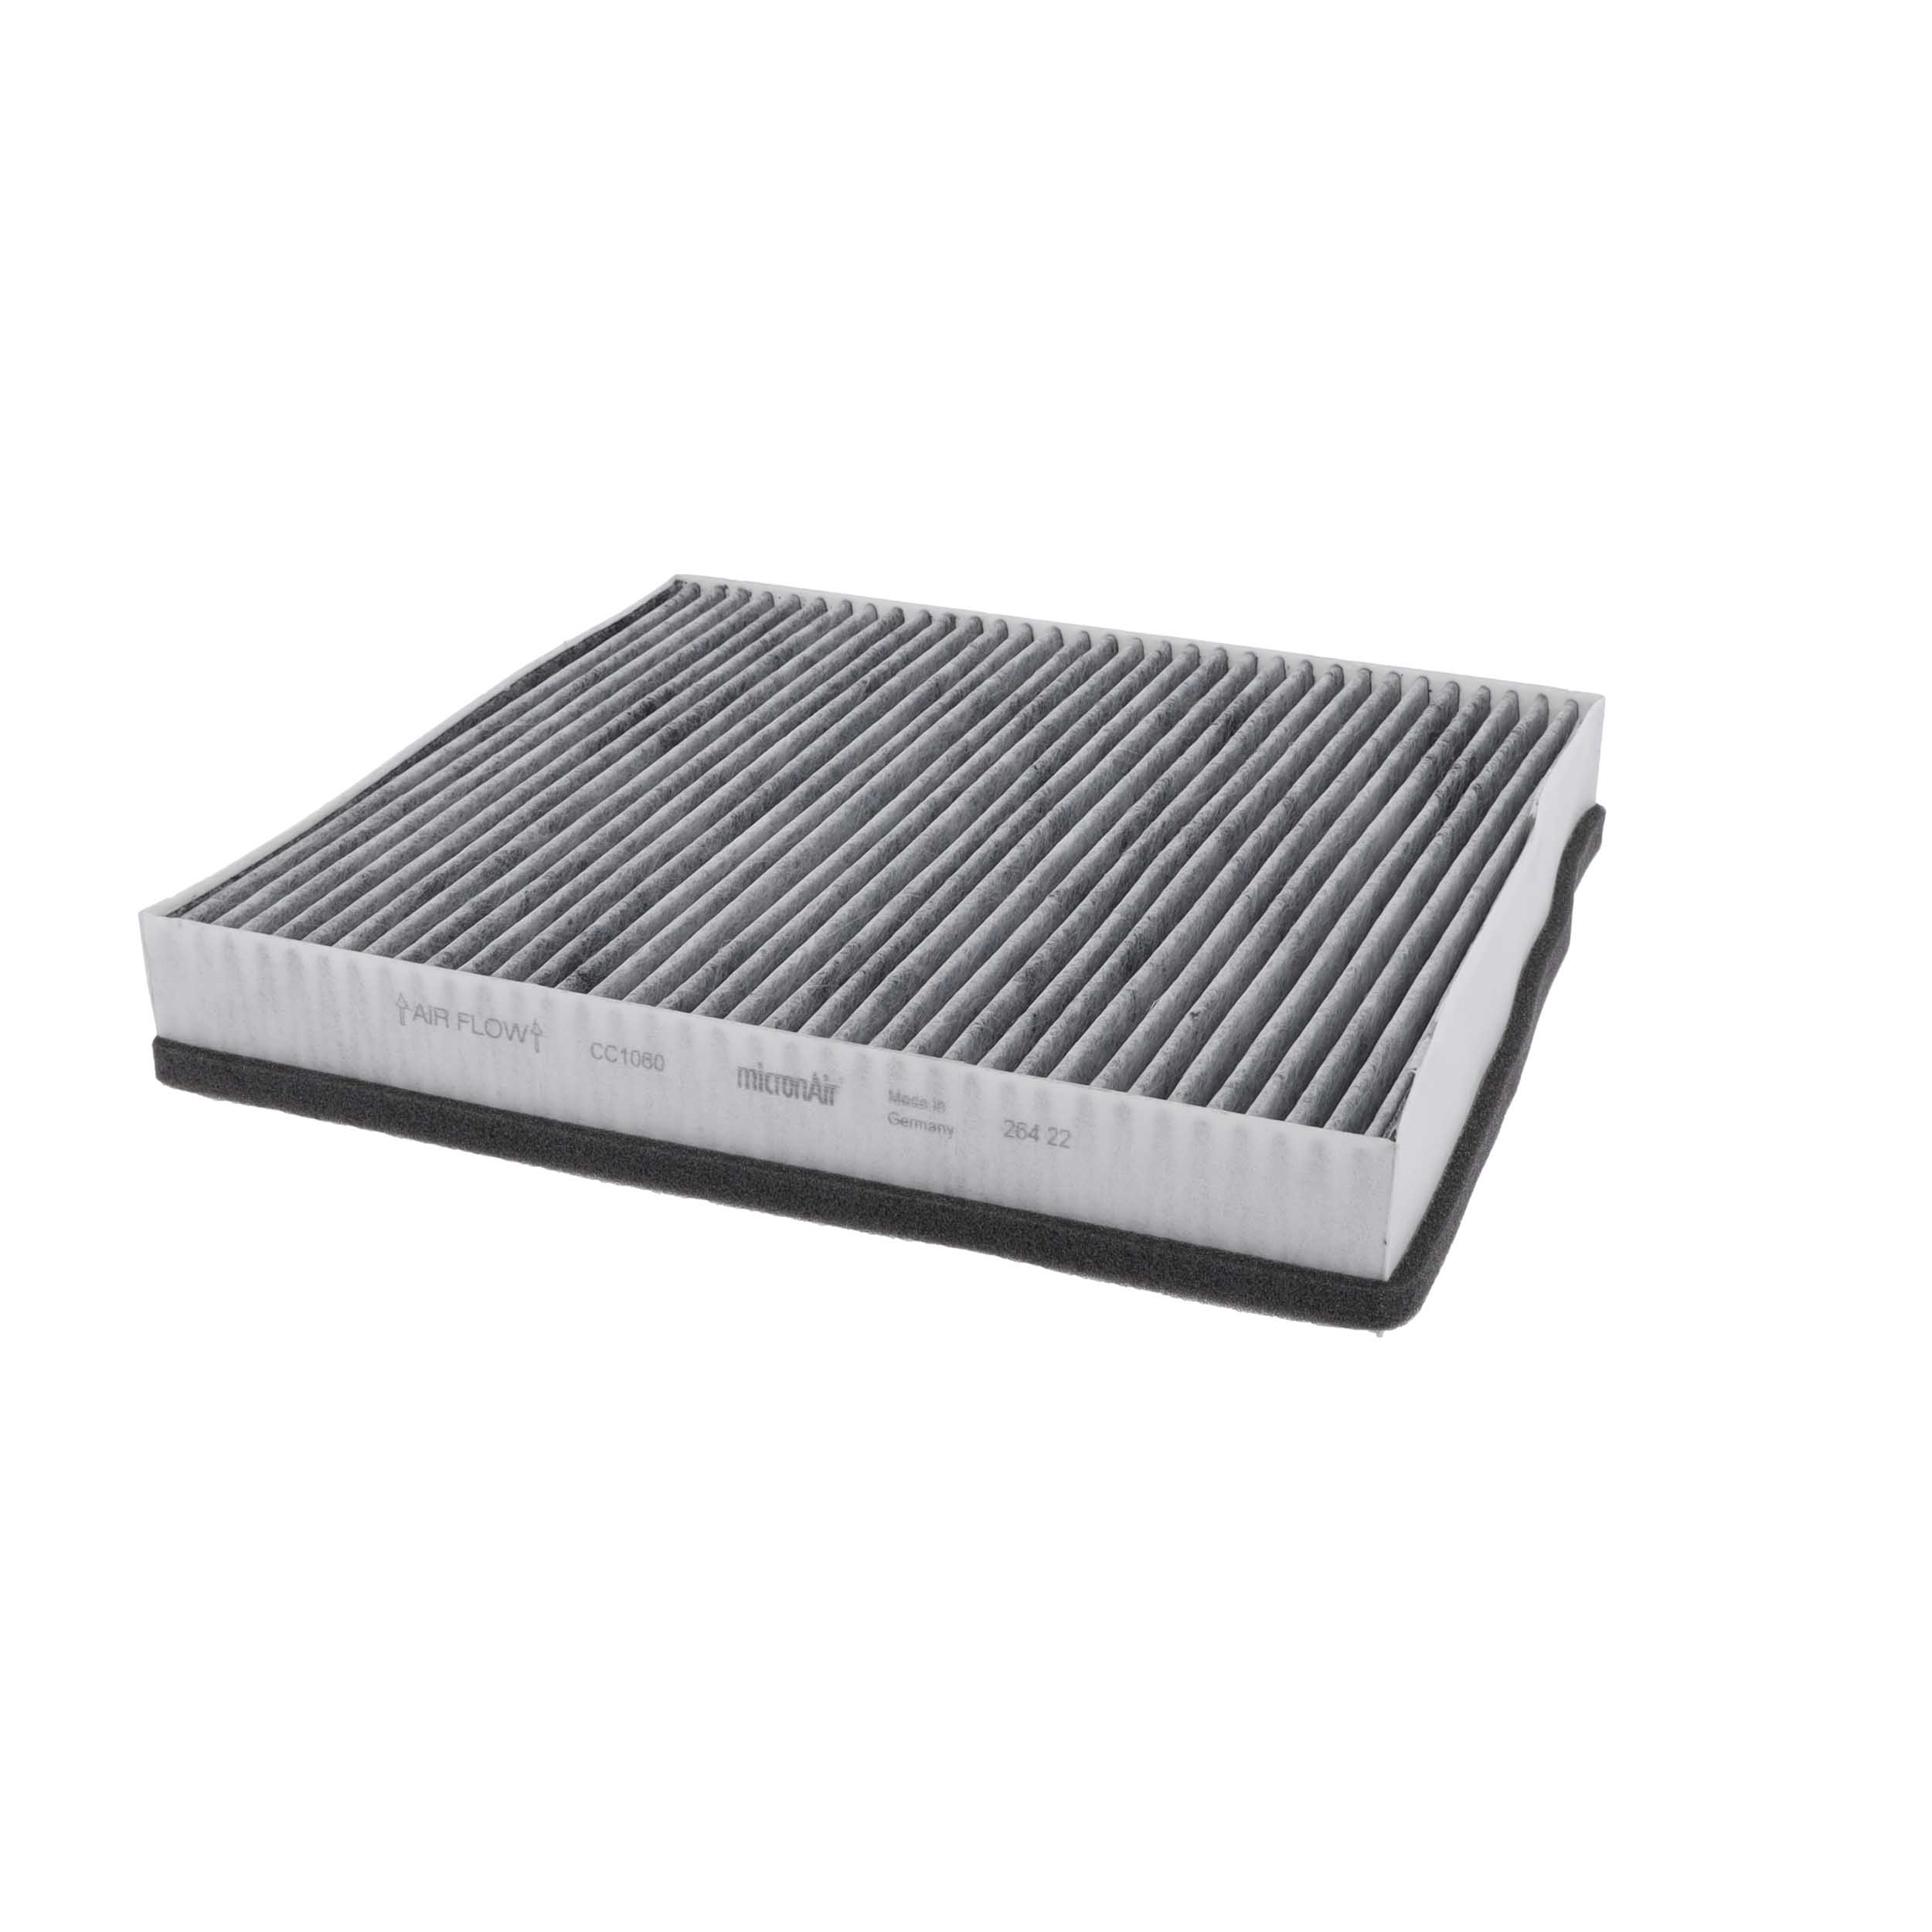 CORTECO Activated Carbon Filter, 241 mm x 272 mm x 39 mm Width: 272mm, Height: 39mm, Length: 241mm Cabin filter 21652996 buy